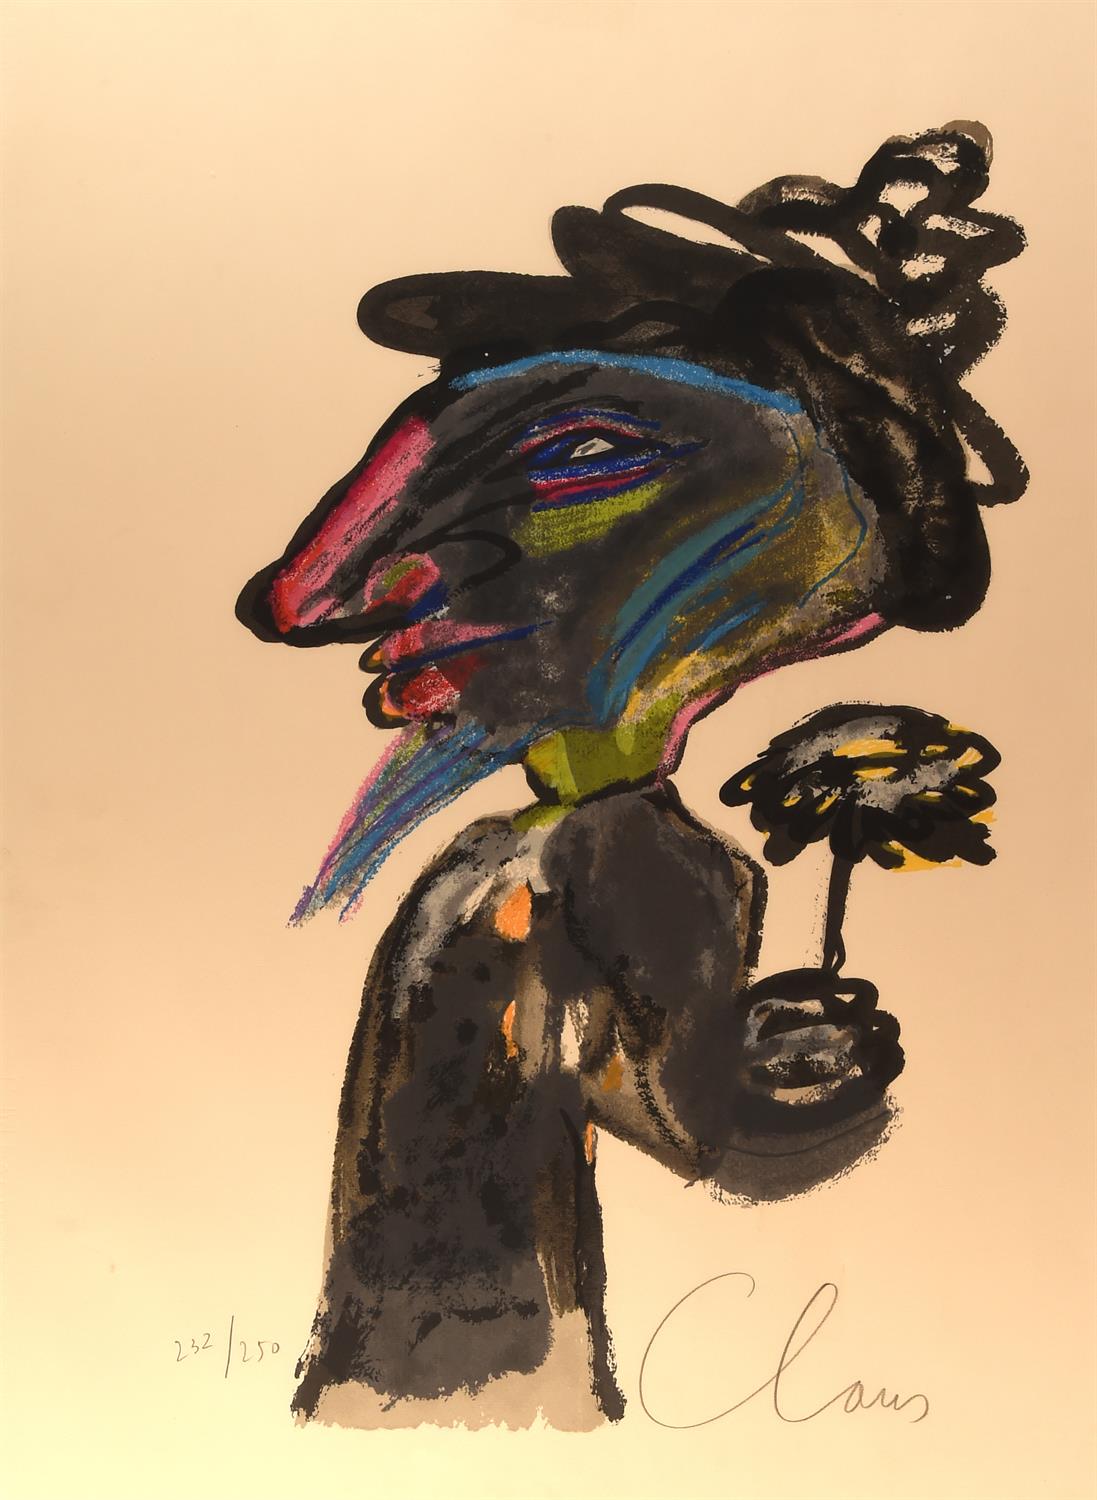 Hugo Claus (1929 – 2008) 'Clown', colour lithograph, signed lower right and numbered 232/250 lower